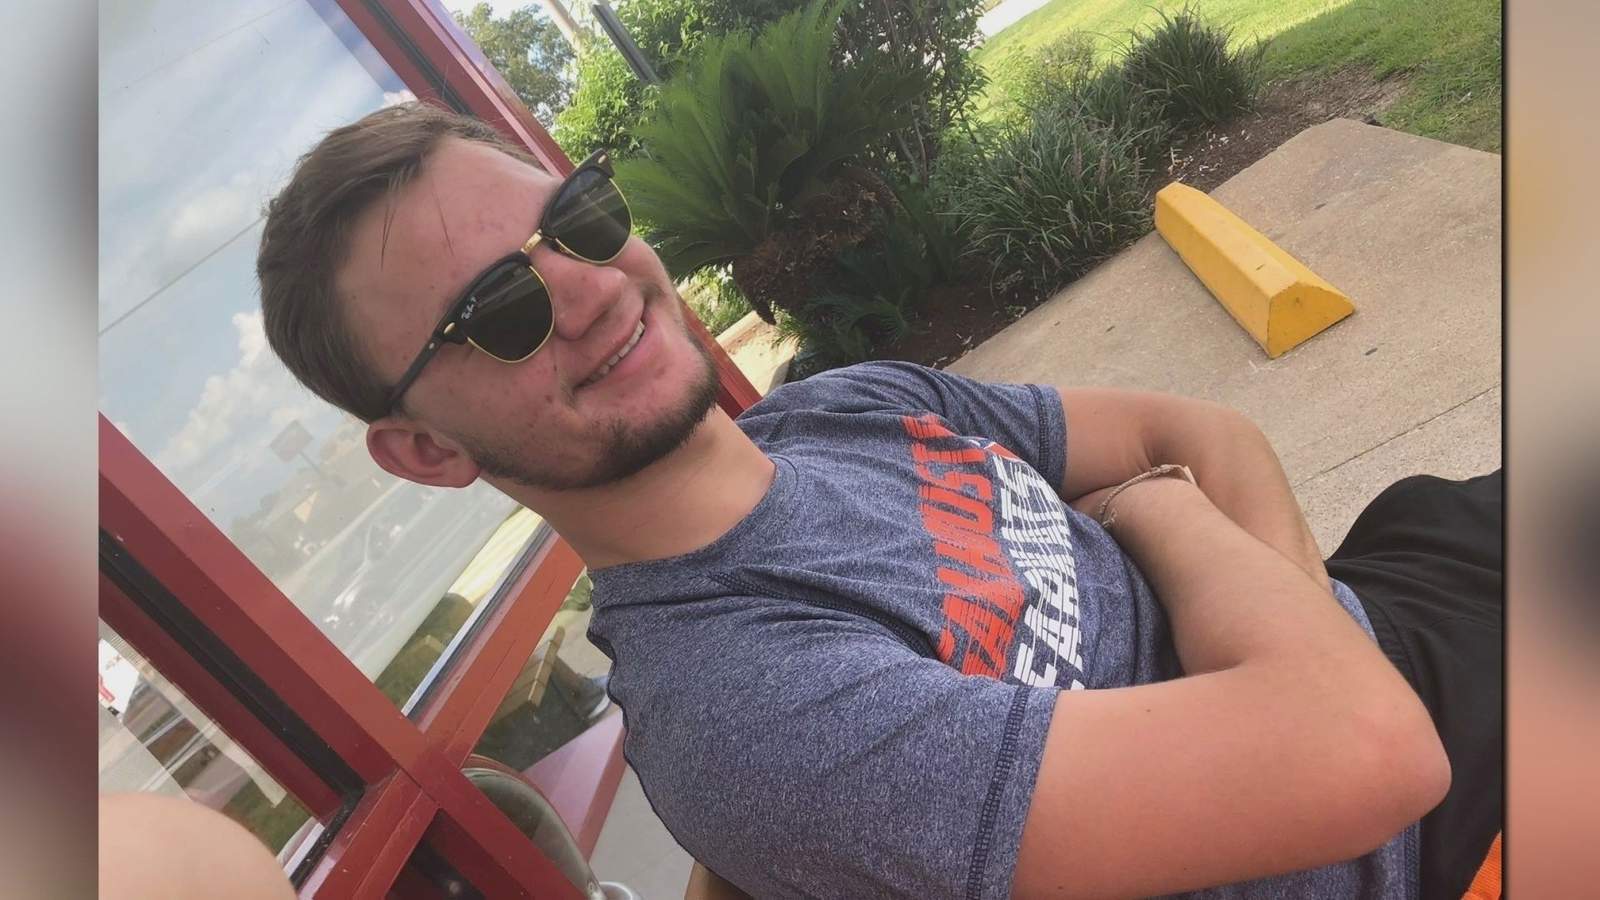 Texas State student from Missouri City missing after car found totaled, abandoned